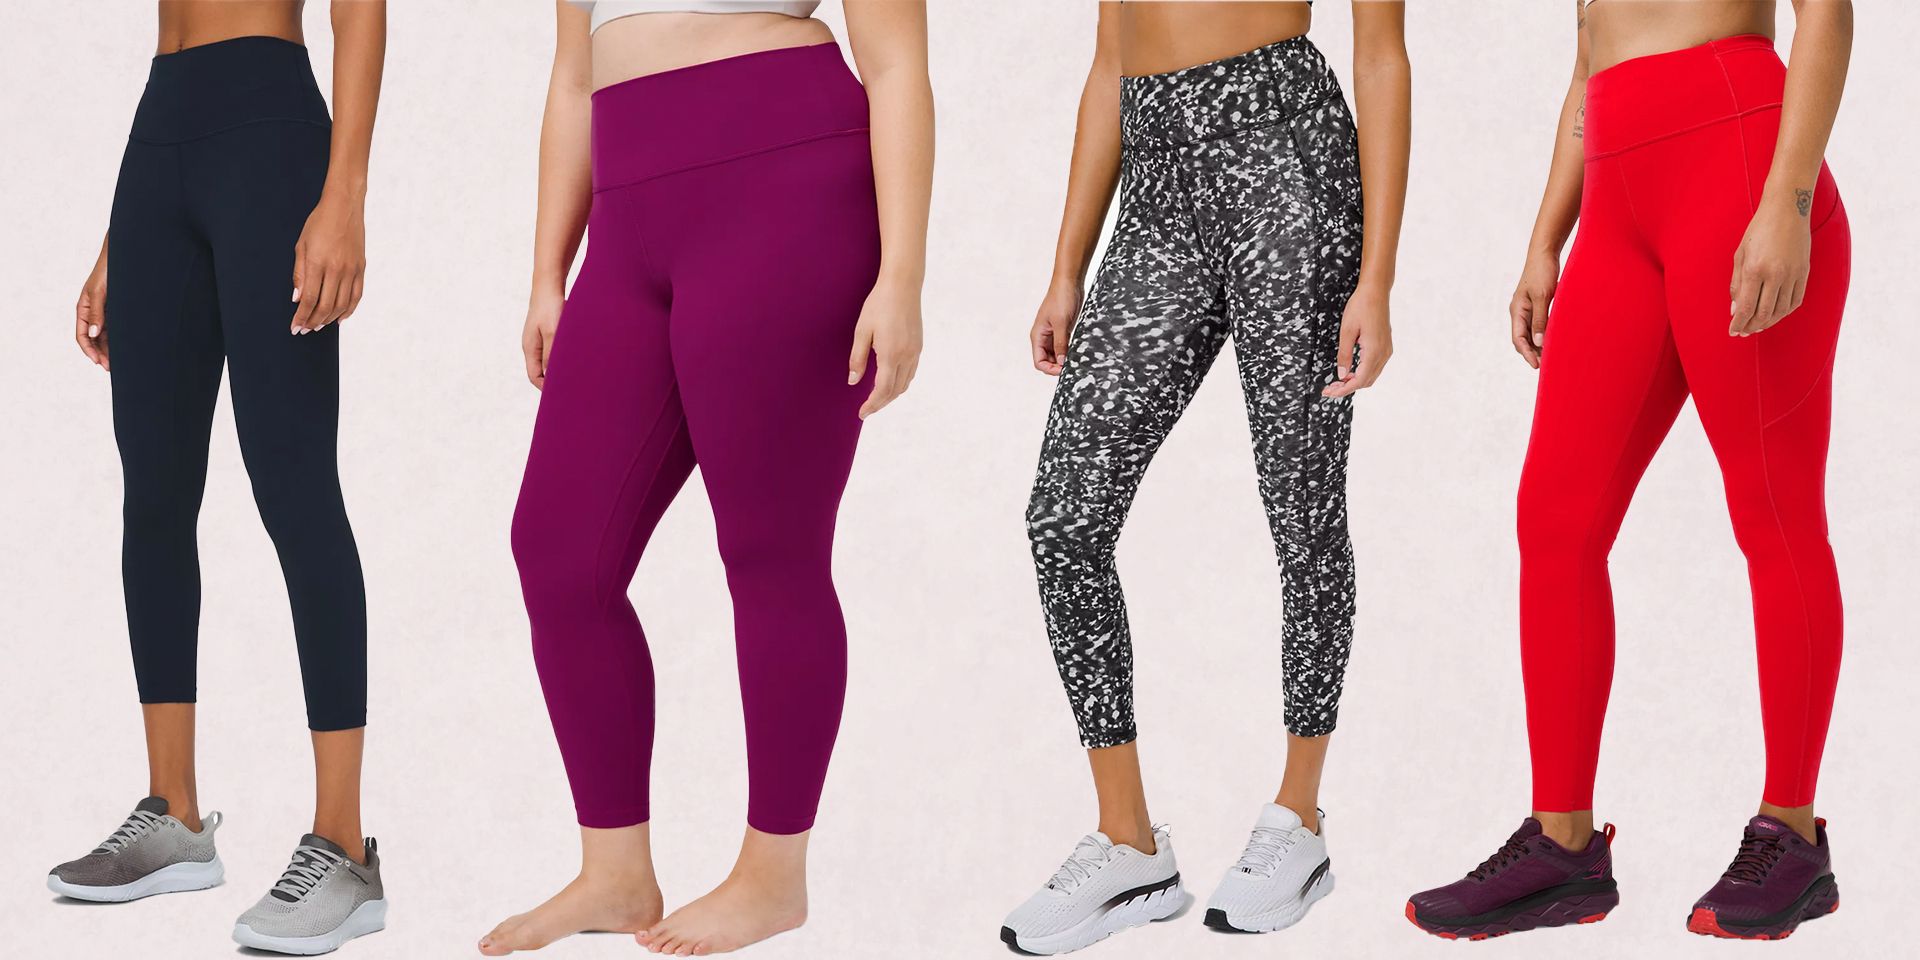 What Are The Classic Lululemon Leggings Called? – solowomen